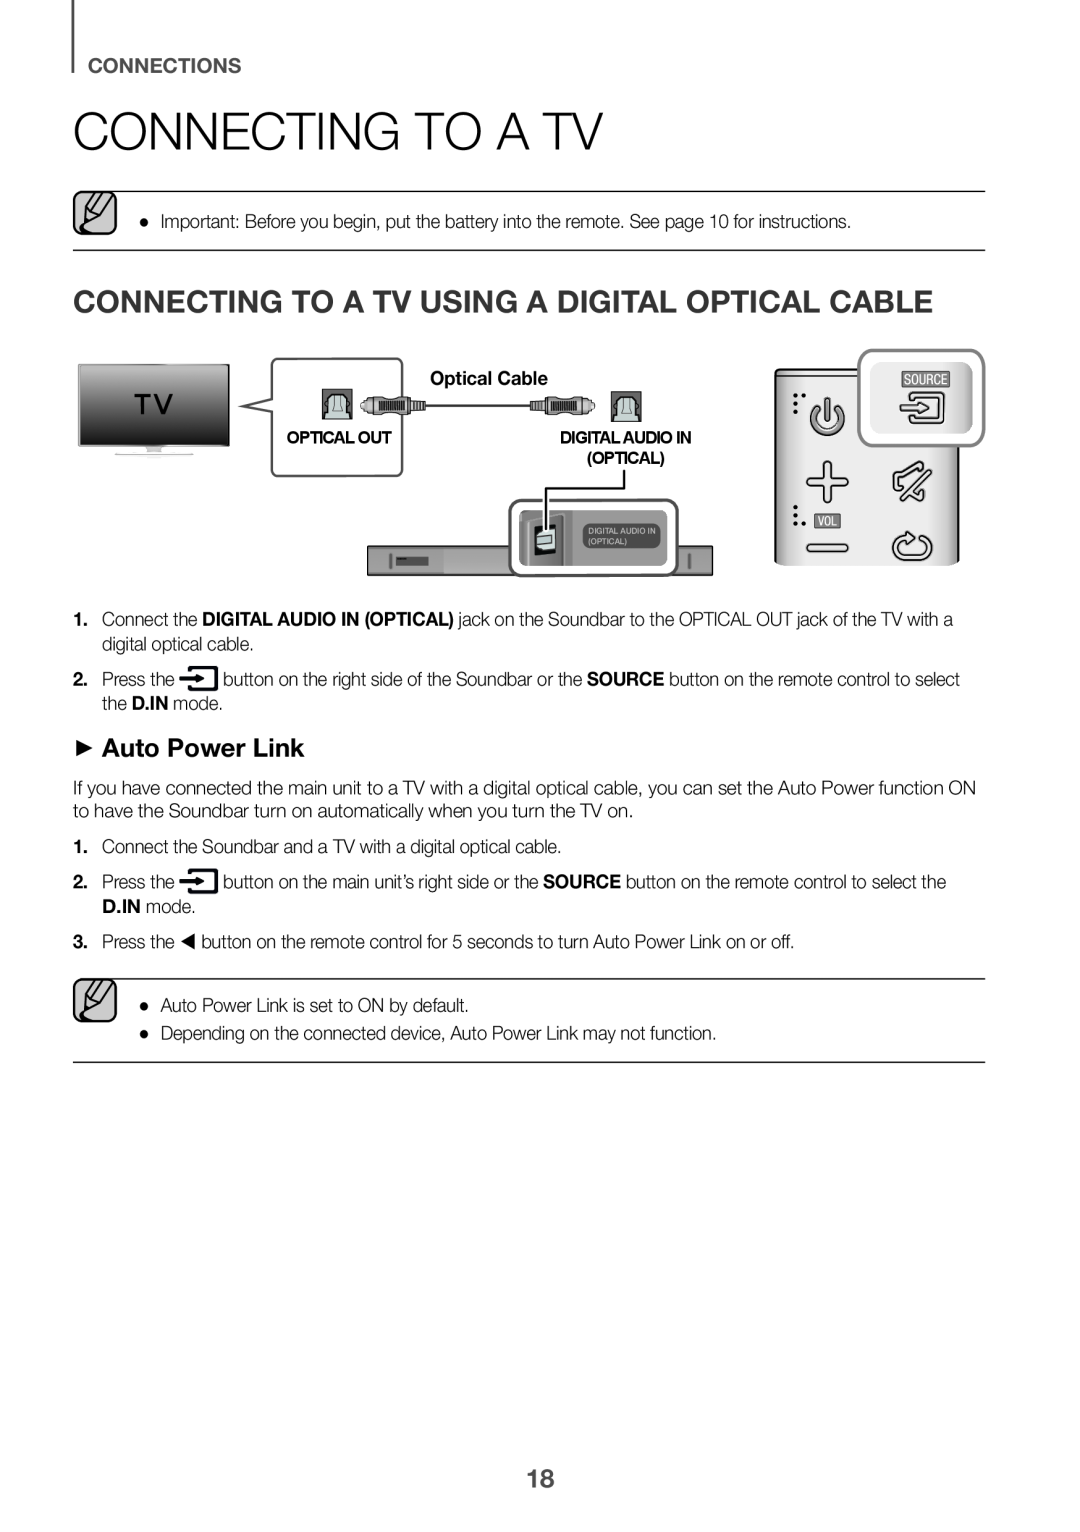 Samsung HW-K651/ZF manual Connecting to a TV Using a Digital Optical Cable, ++Auto Power Link, Connections, D.IN mode 